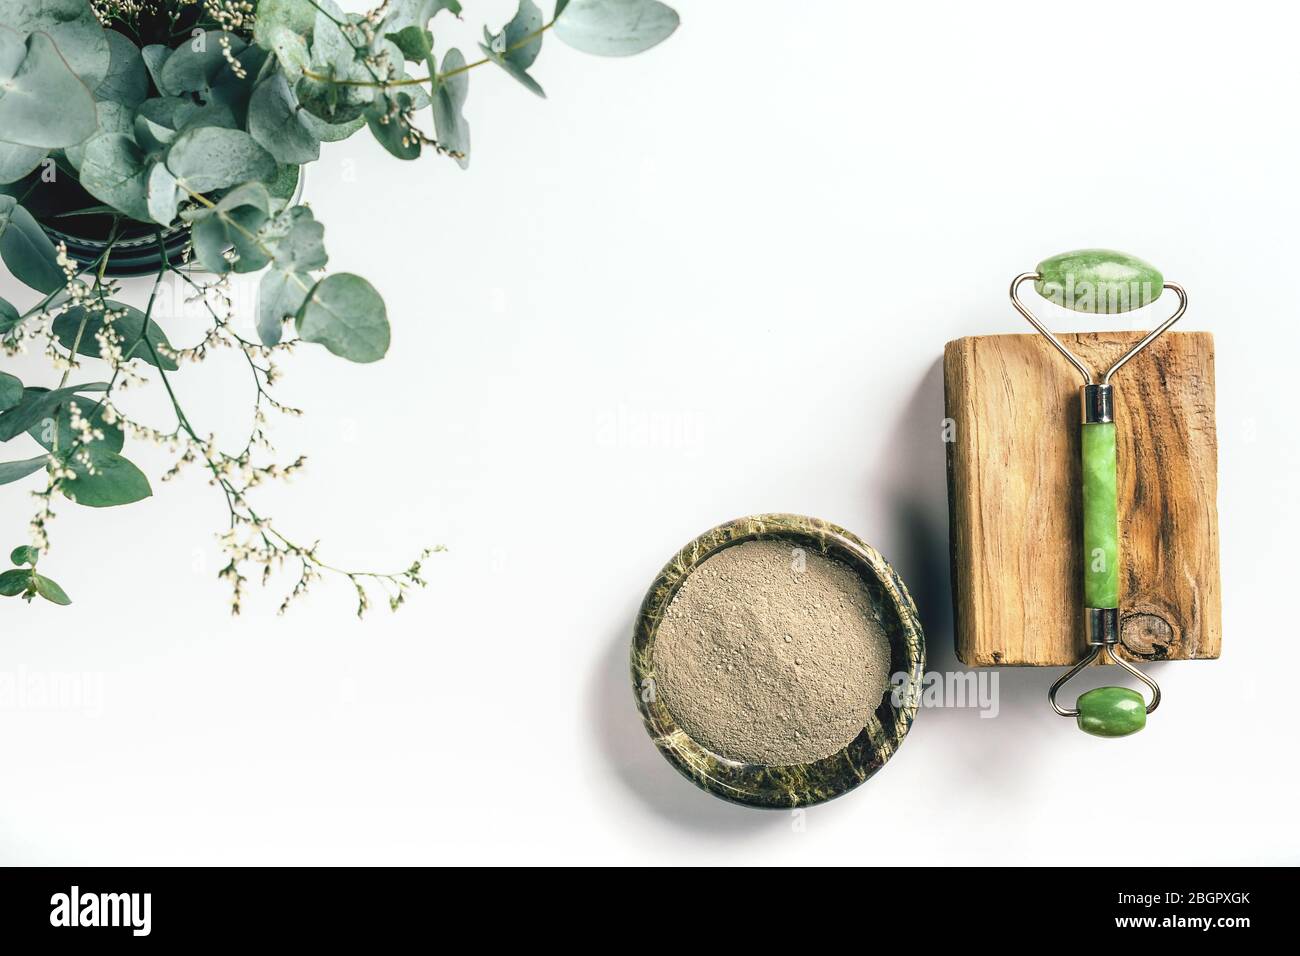 Facial greenstone roller on wooden bar and clay powder in bowl with eucalyptus and herbs in the corner on white paper background with copy space. Health and beauty concept. Stock Photo